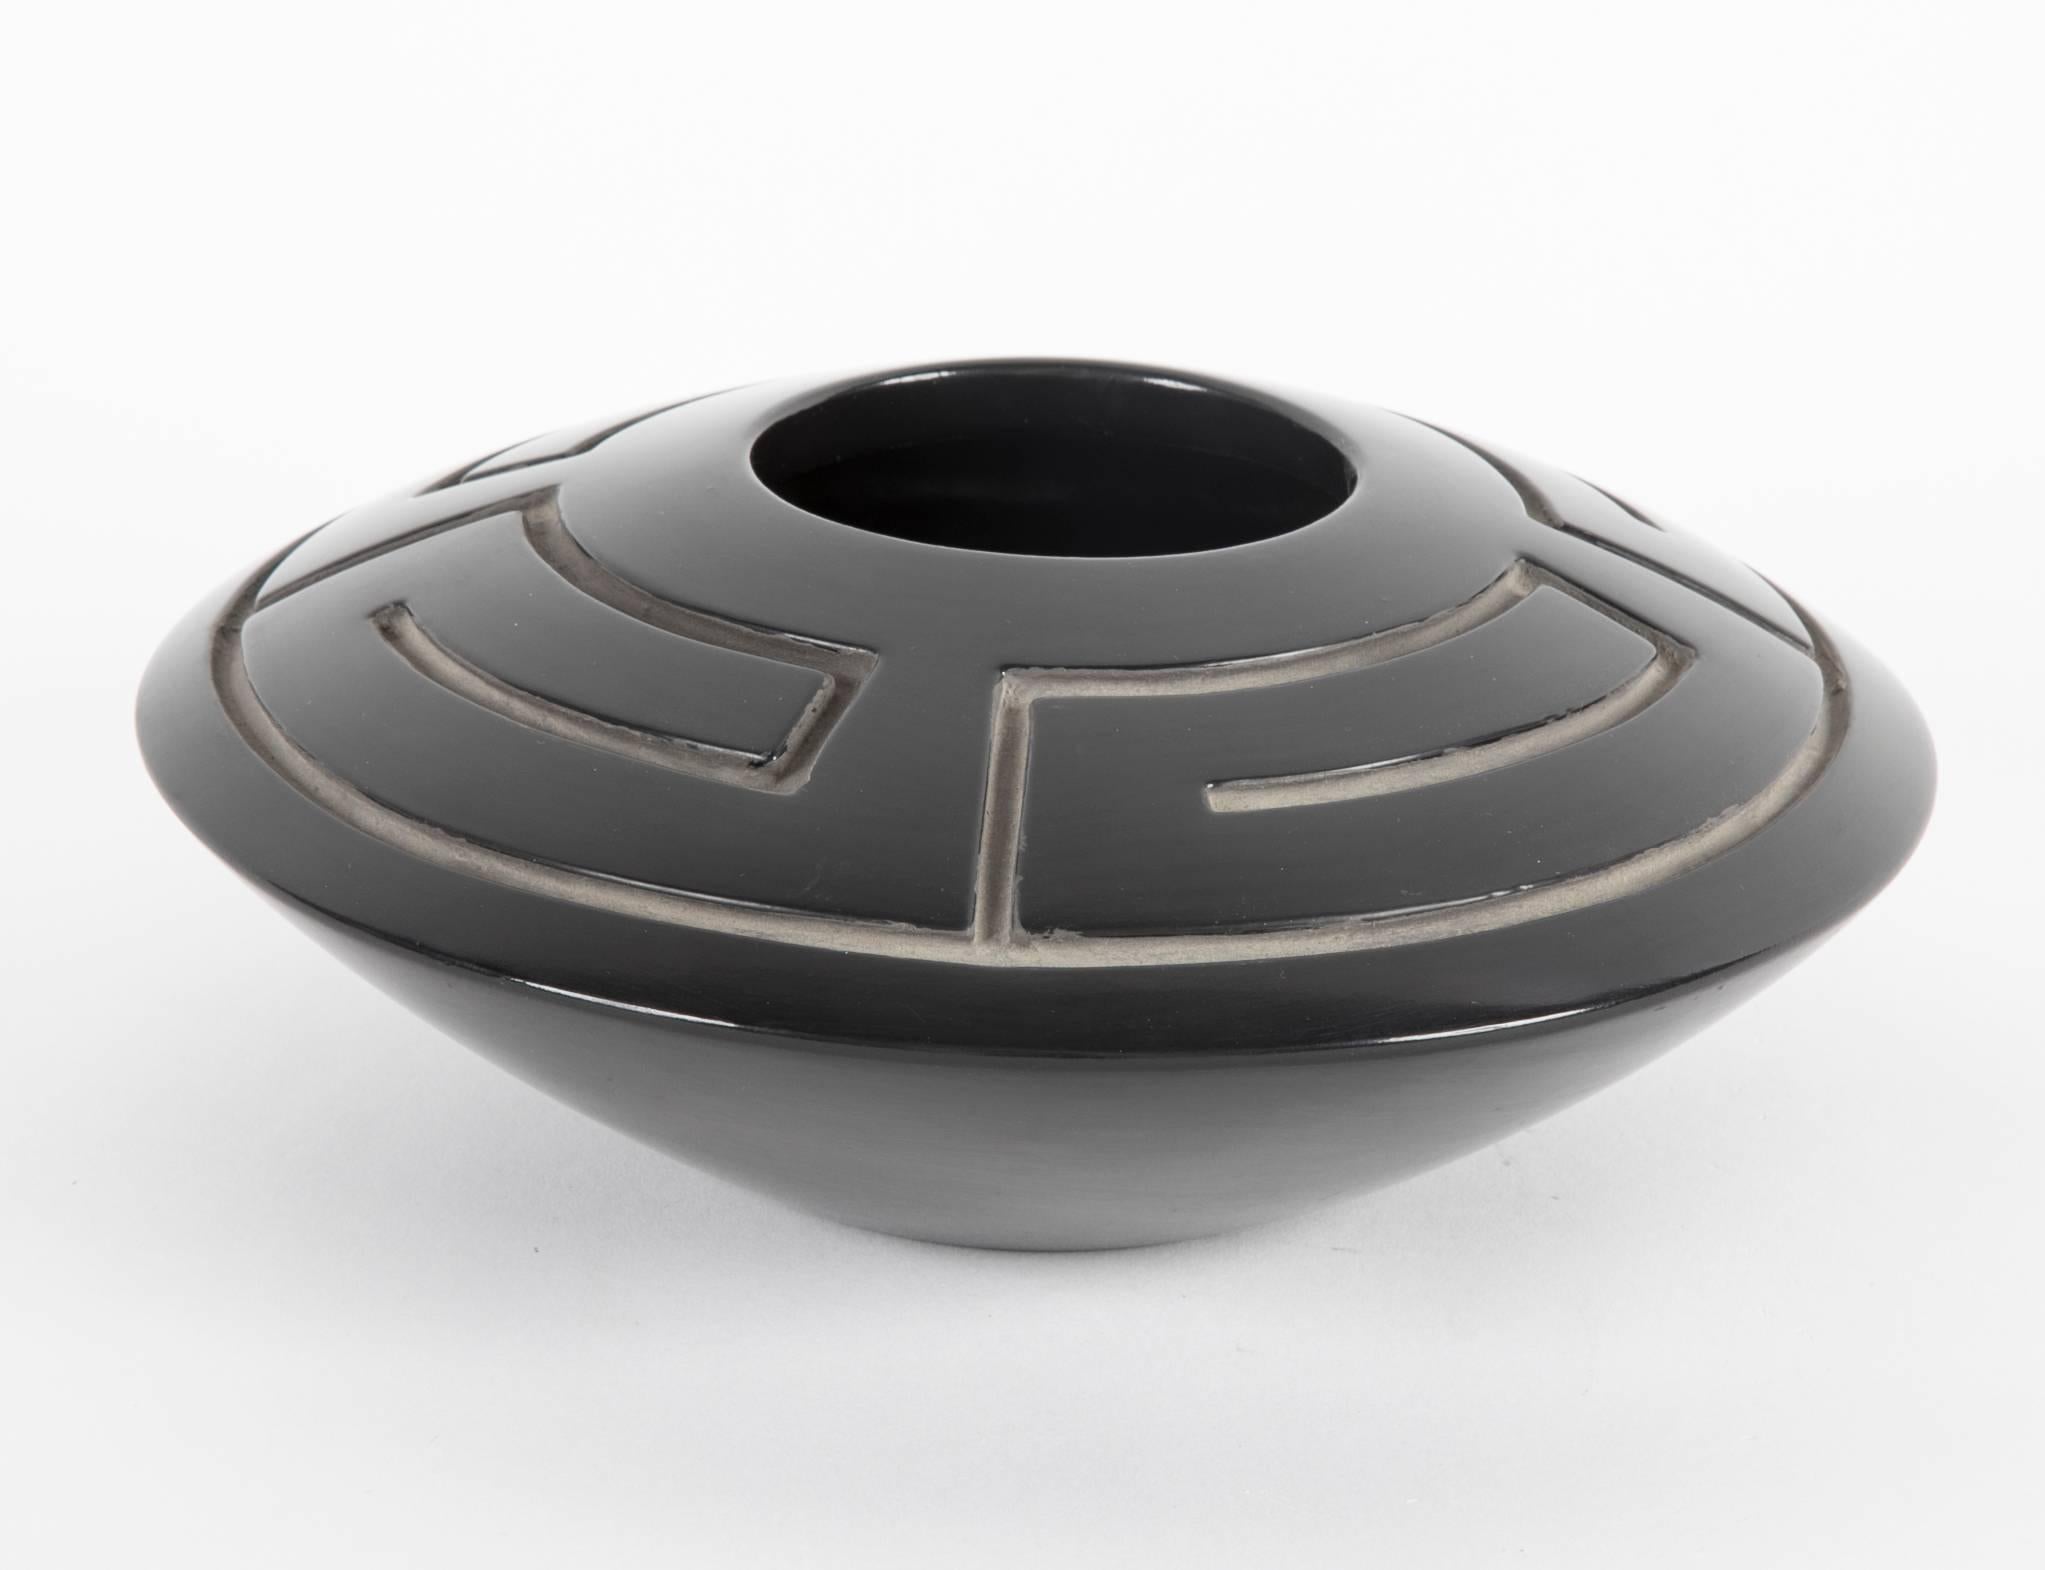 A large saucer form vase with deep incising. Blackware pottery signed and dated on underside. By Jeff Roller, 06, 92.